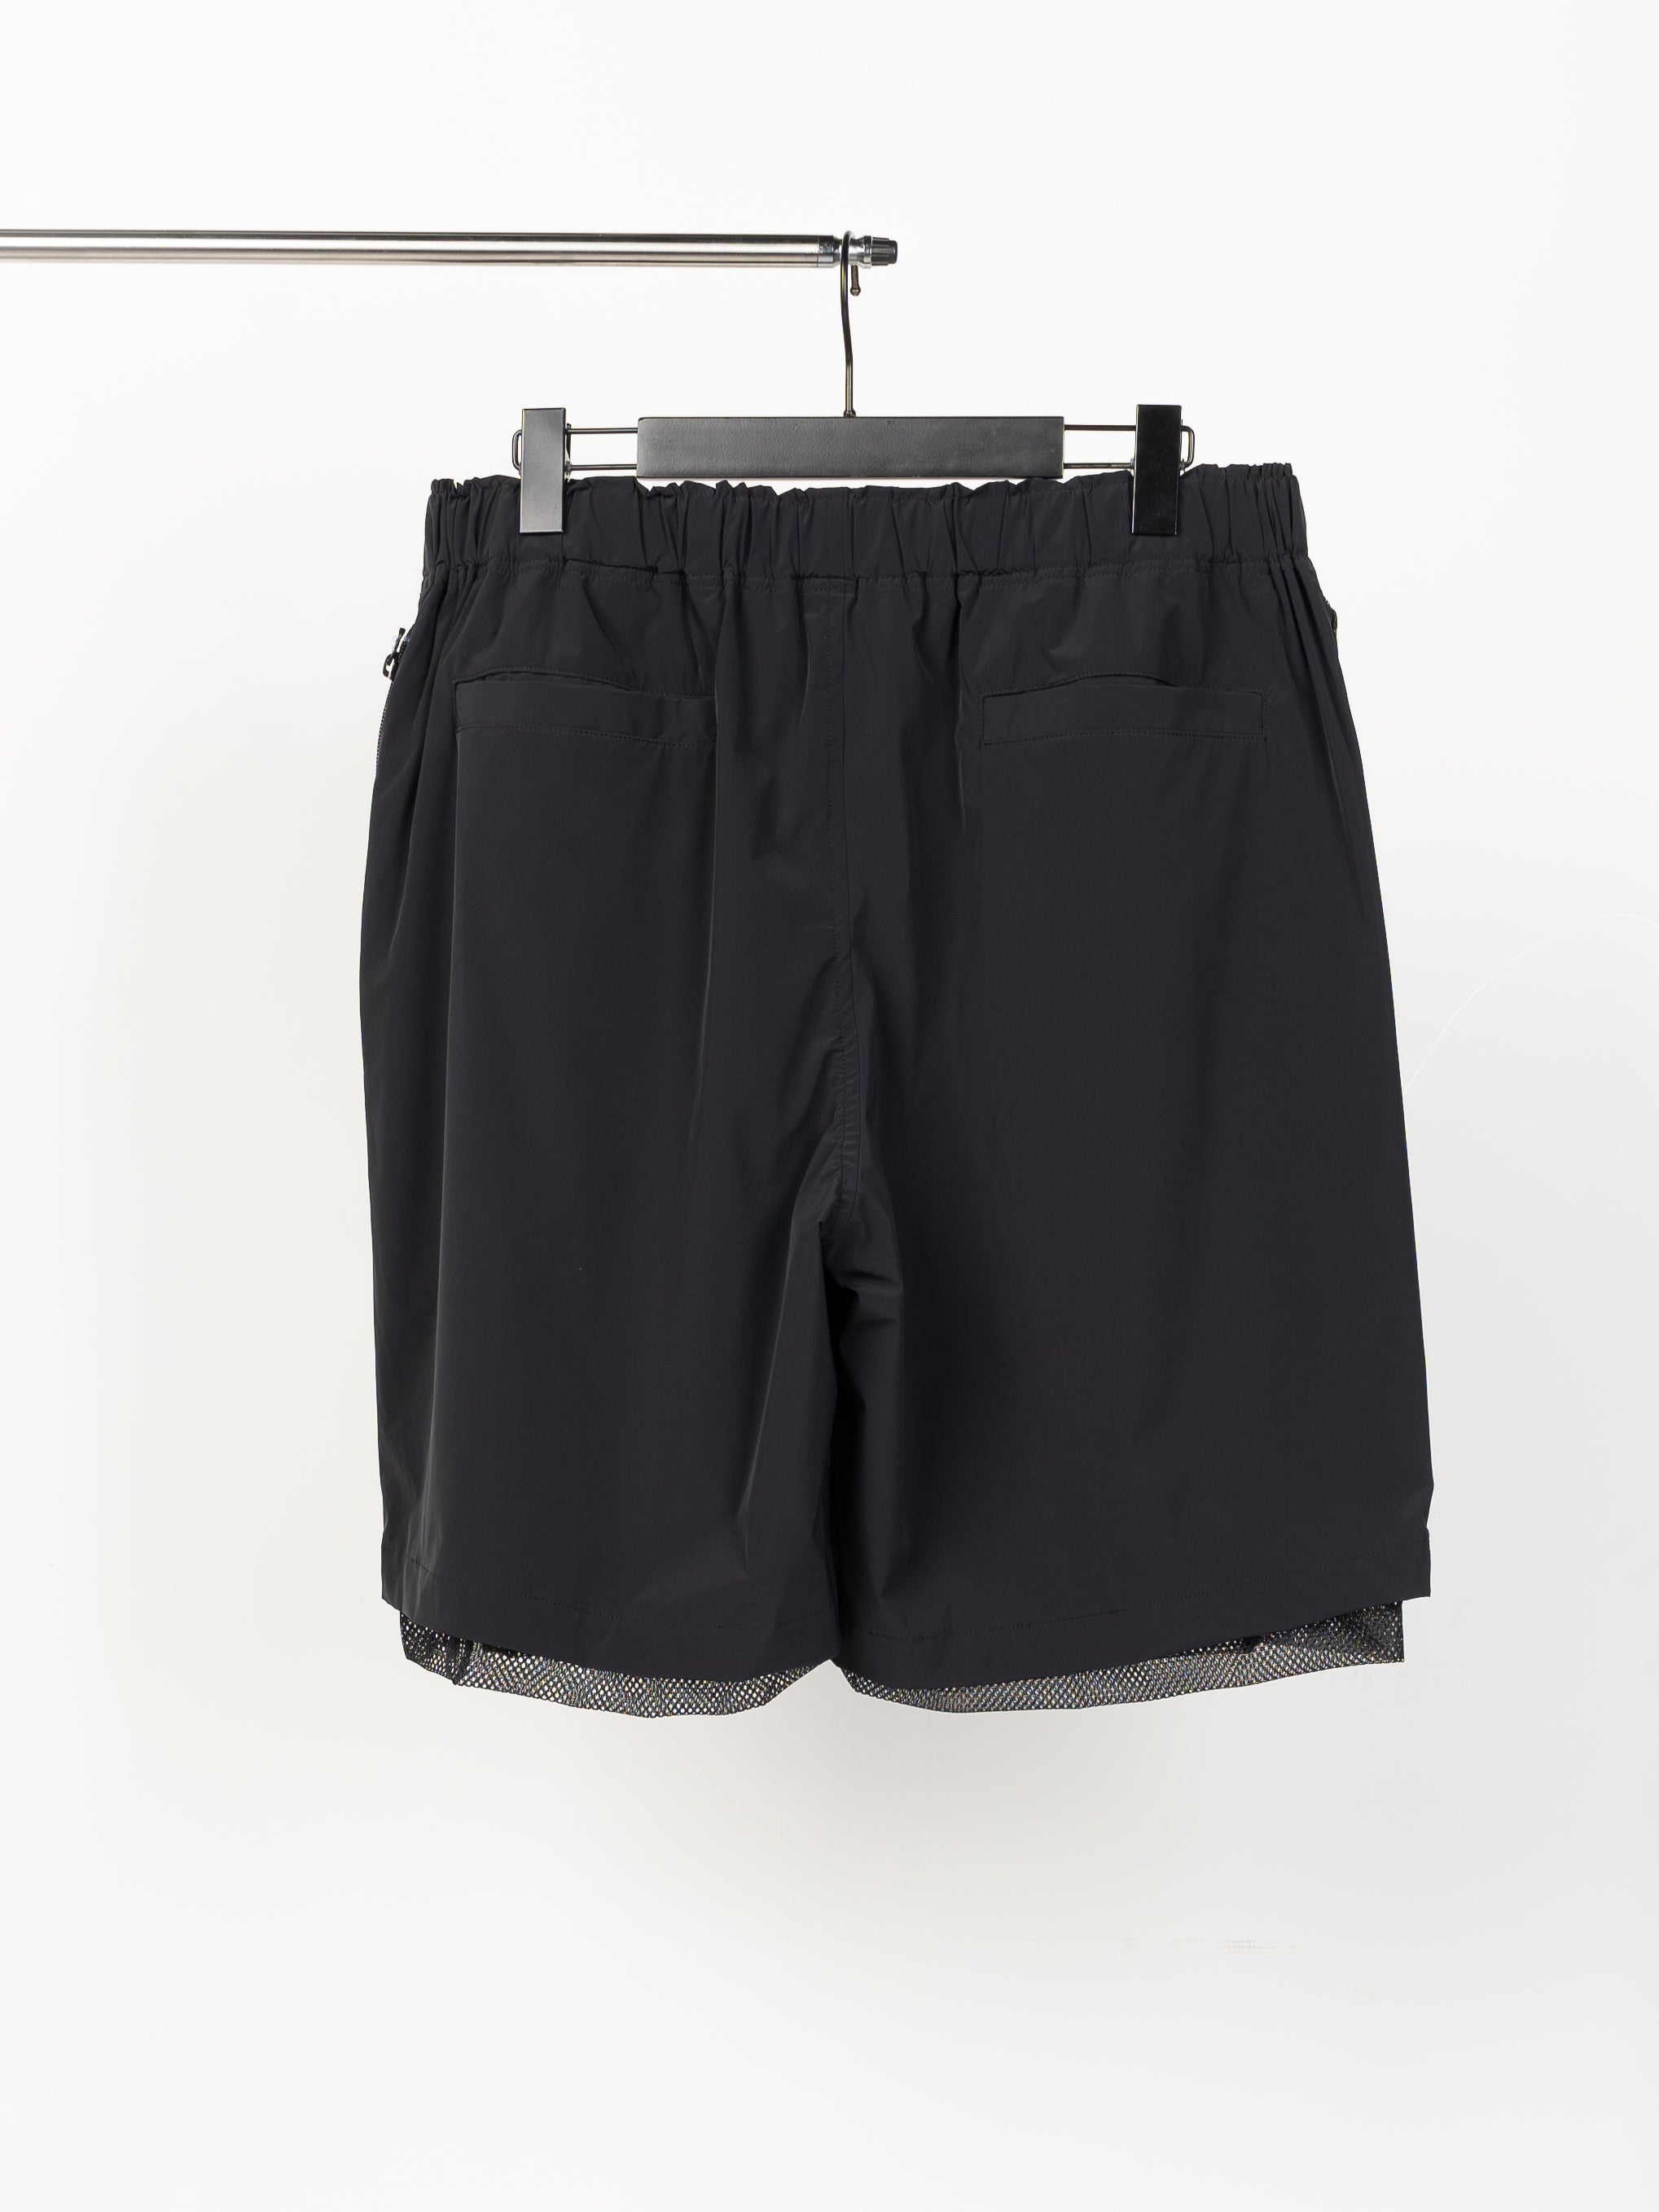 is-ness Techical Ventilation Shorts (Black)